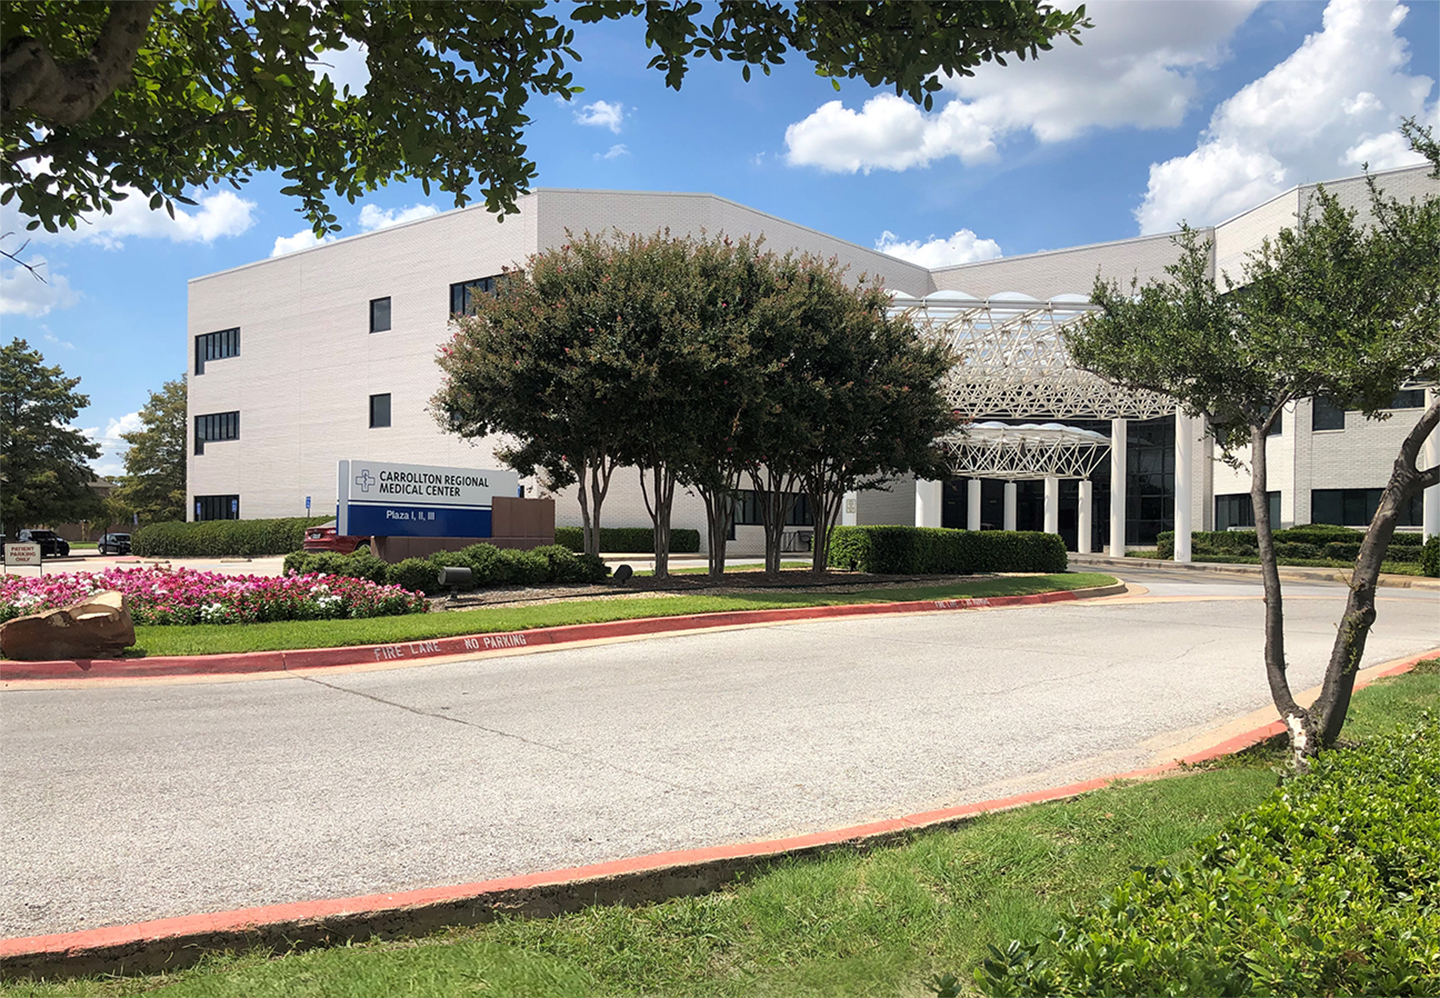 Dallas Property Management Division awarded four-building medical office property